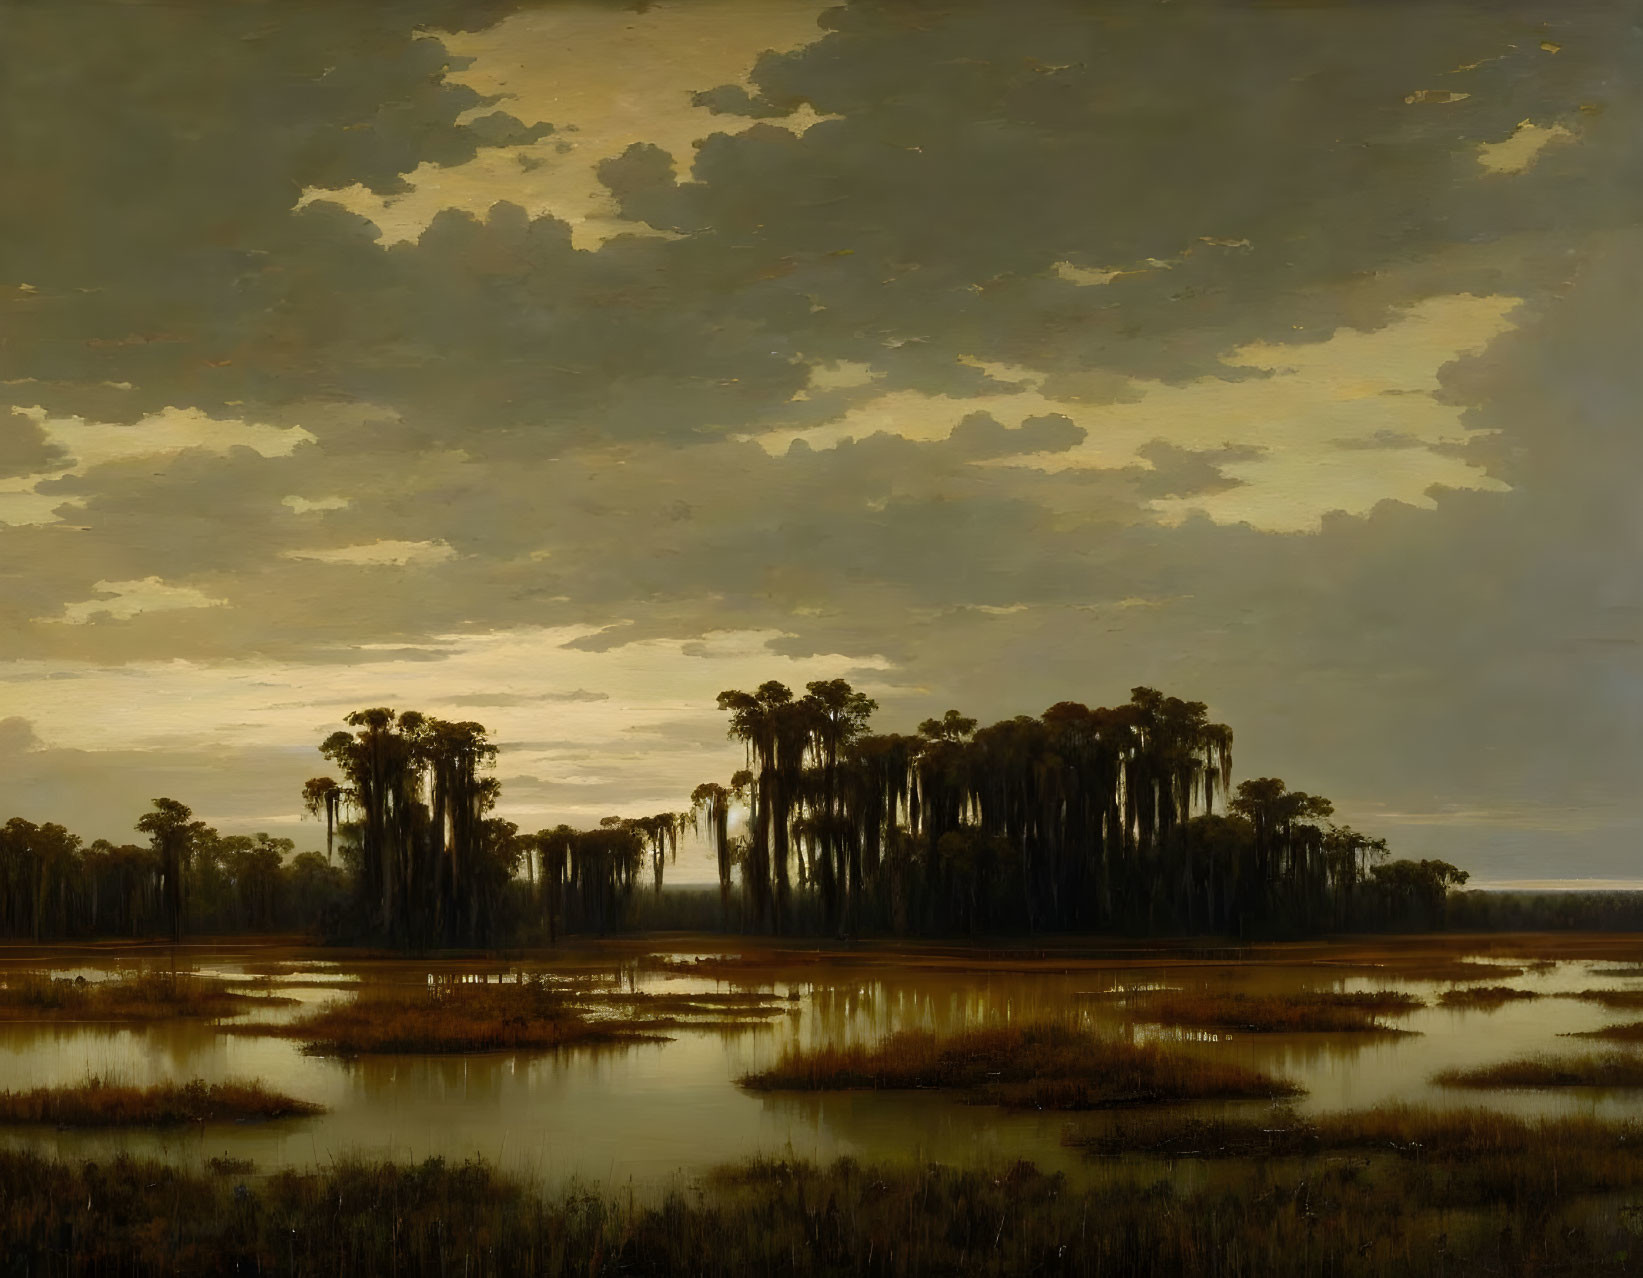 Tranquil swamp painting at dusk with tall trees and cloudy sky